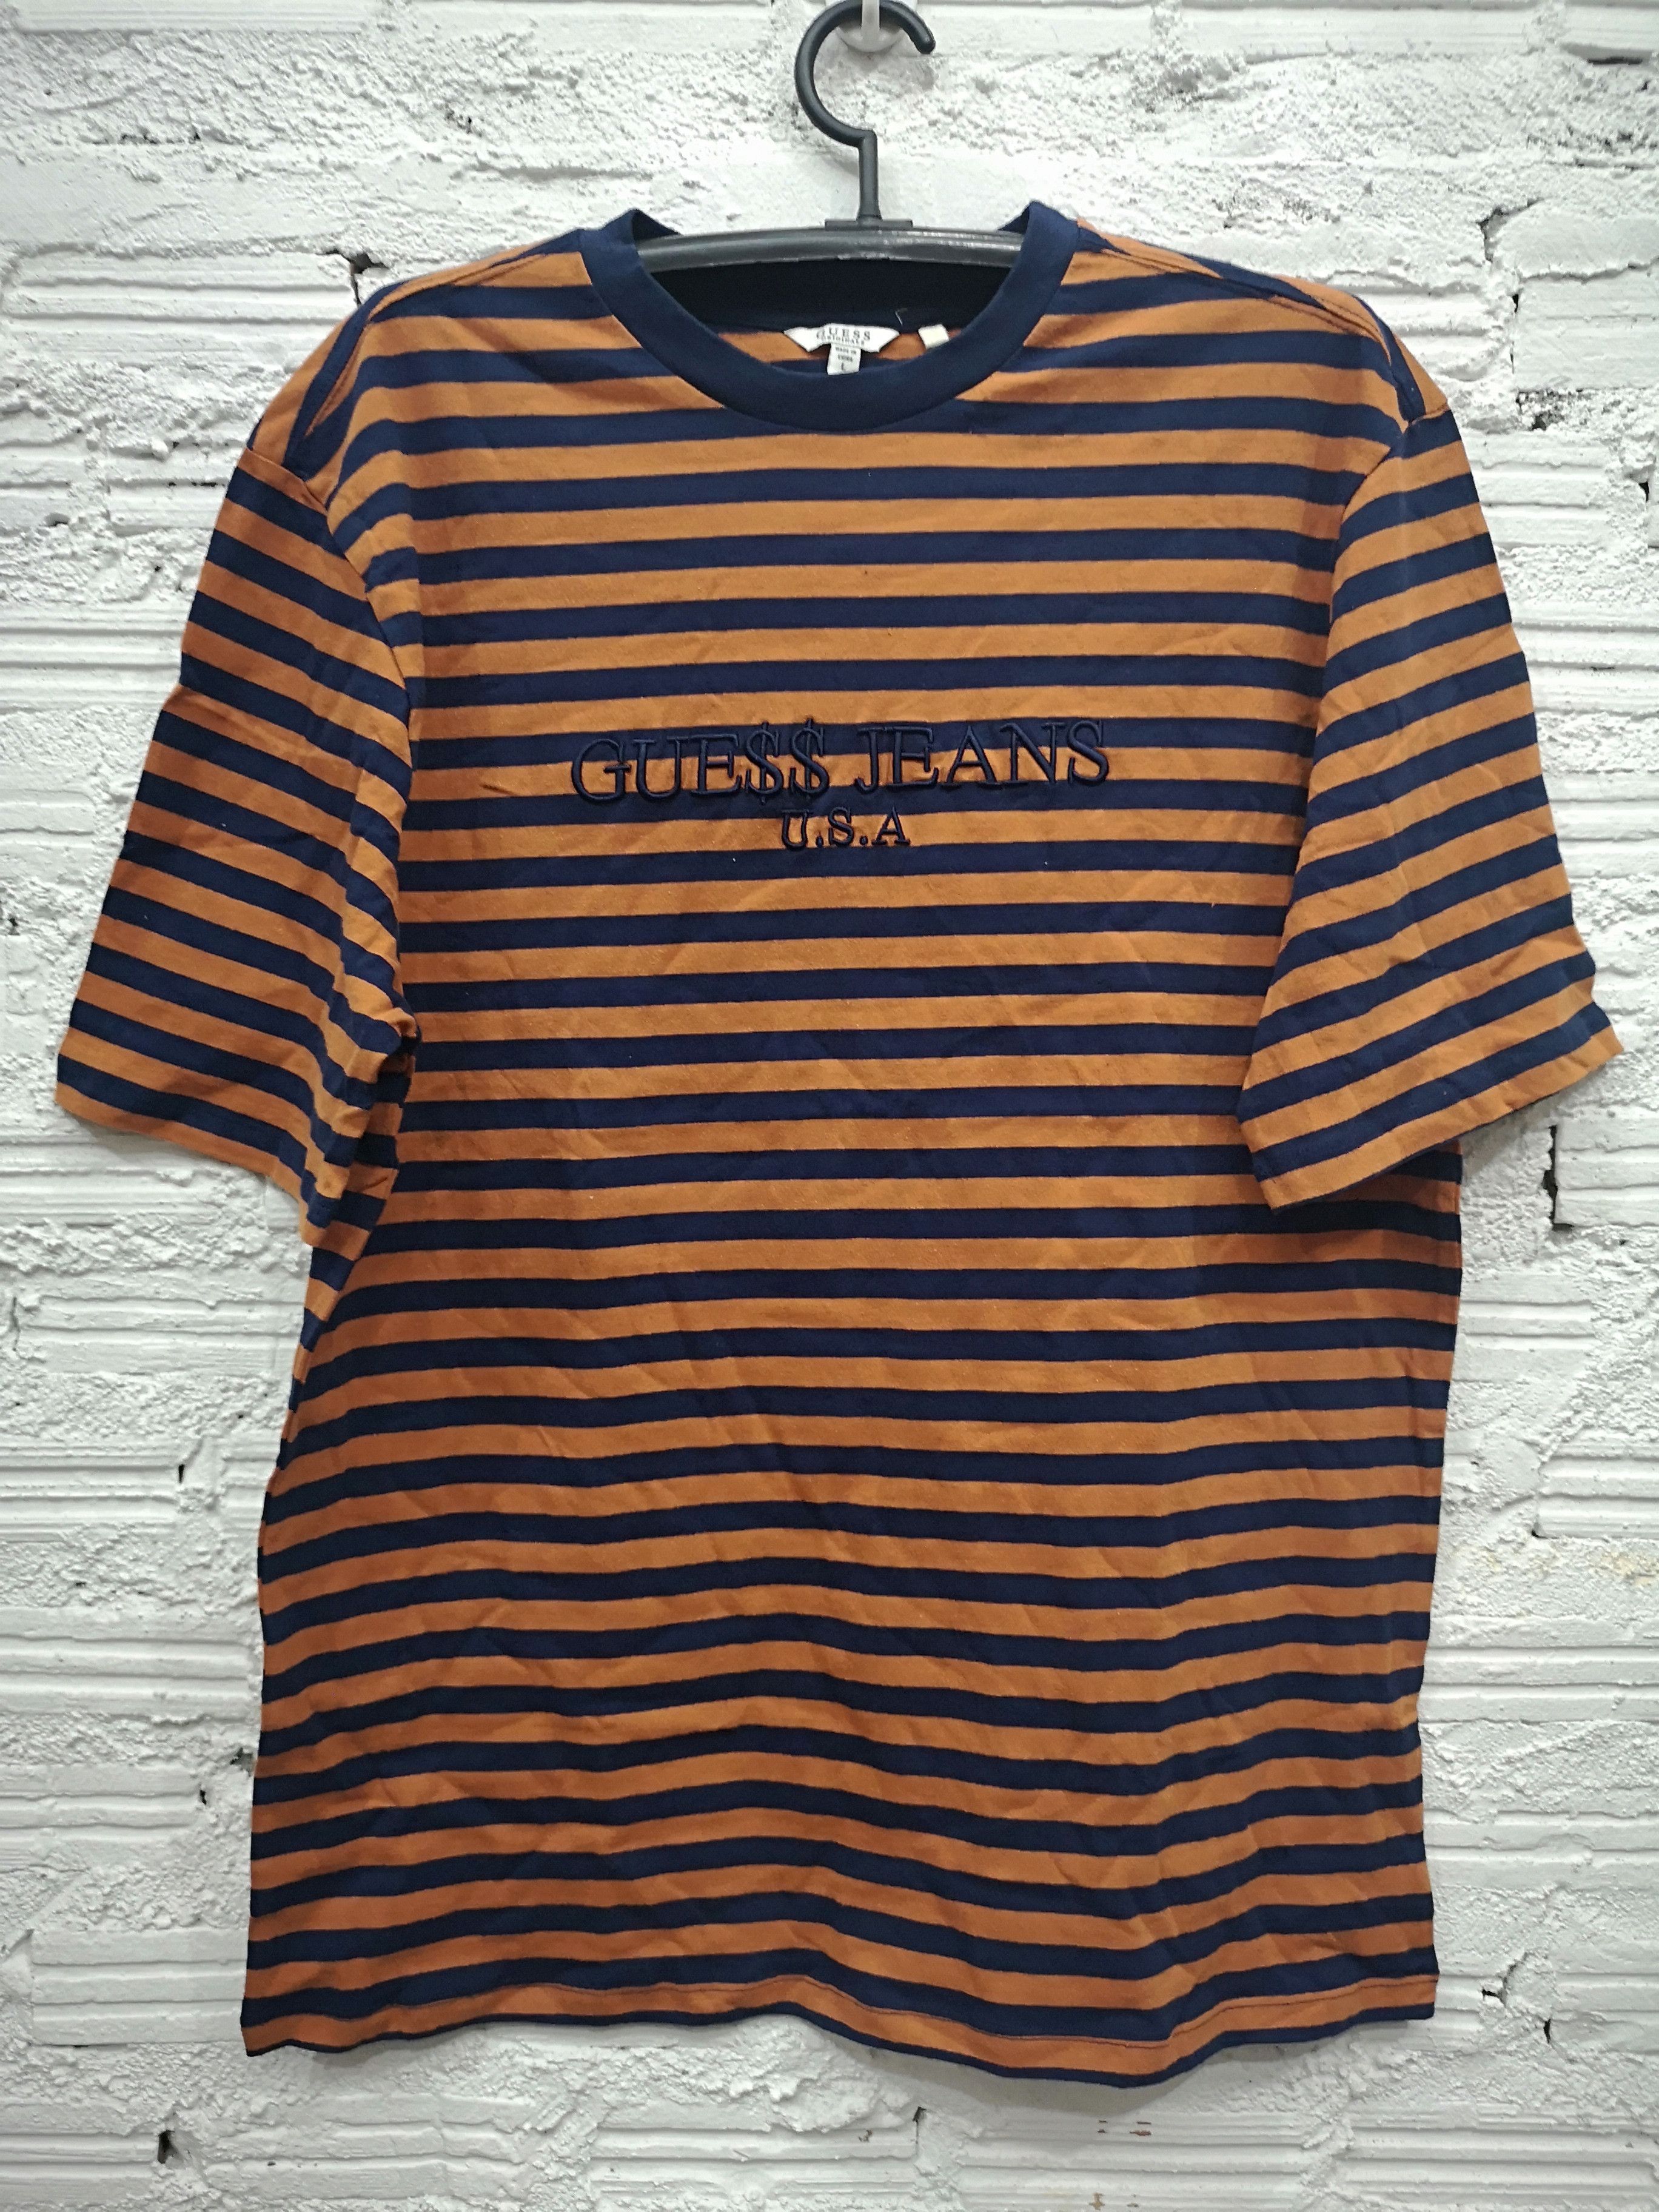 Guess Guess Jeans USA ASAP Reactive Orange Navy Striped Tee T Shirt L | Grailed